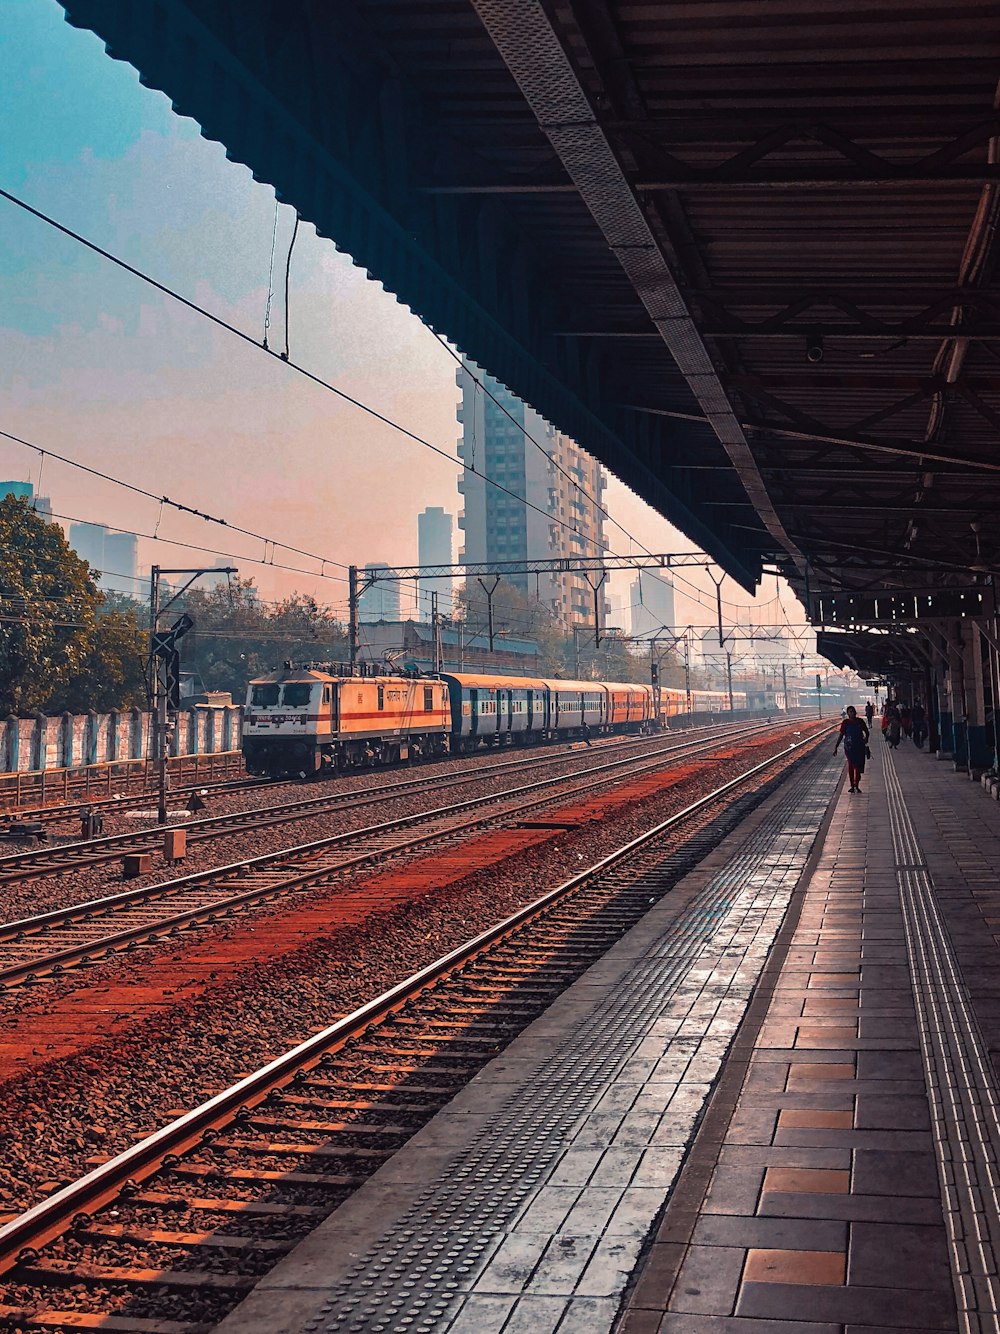 100+ Indian Railway Pictures | Download Free Images on Unsplash